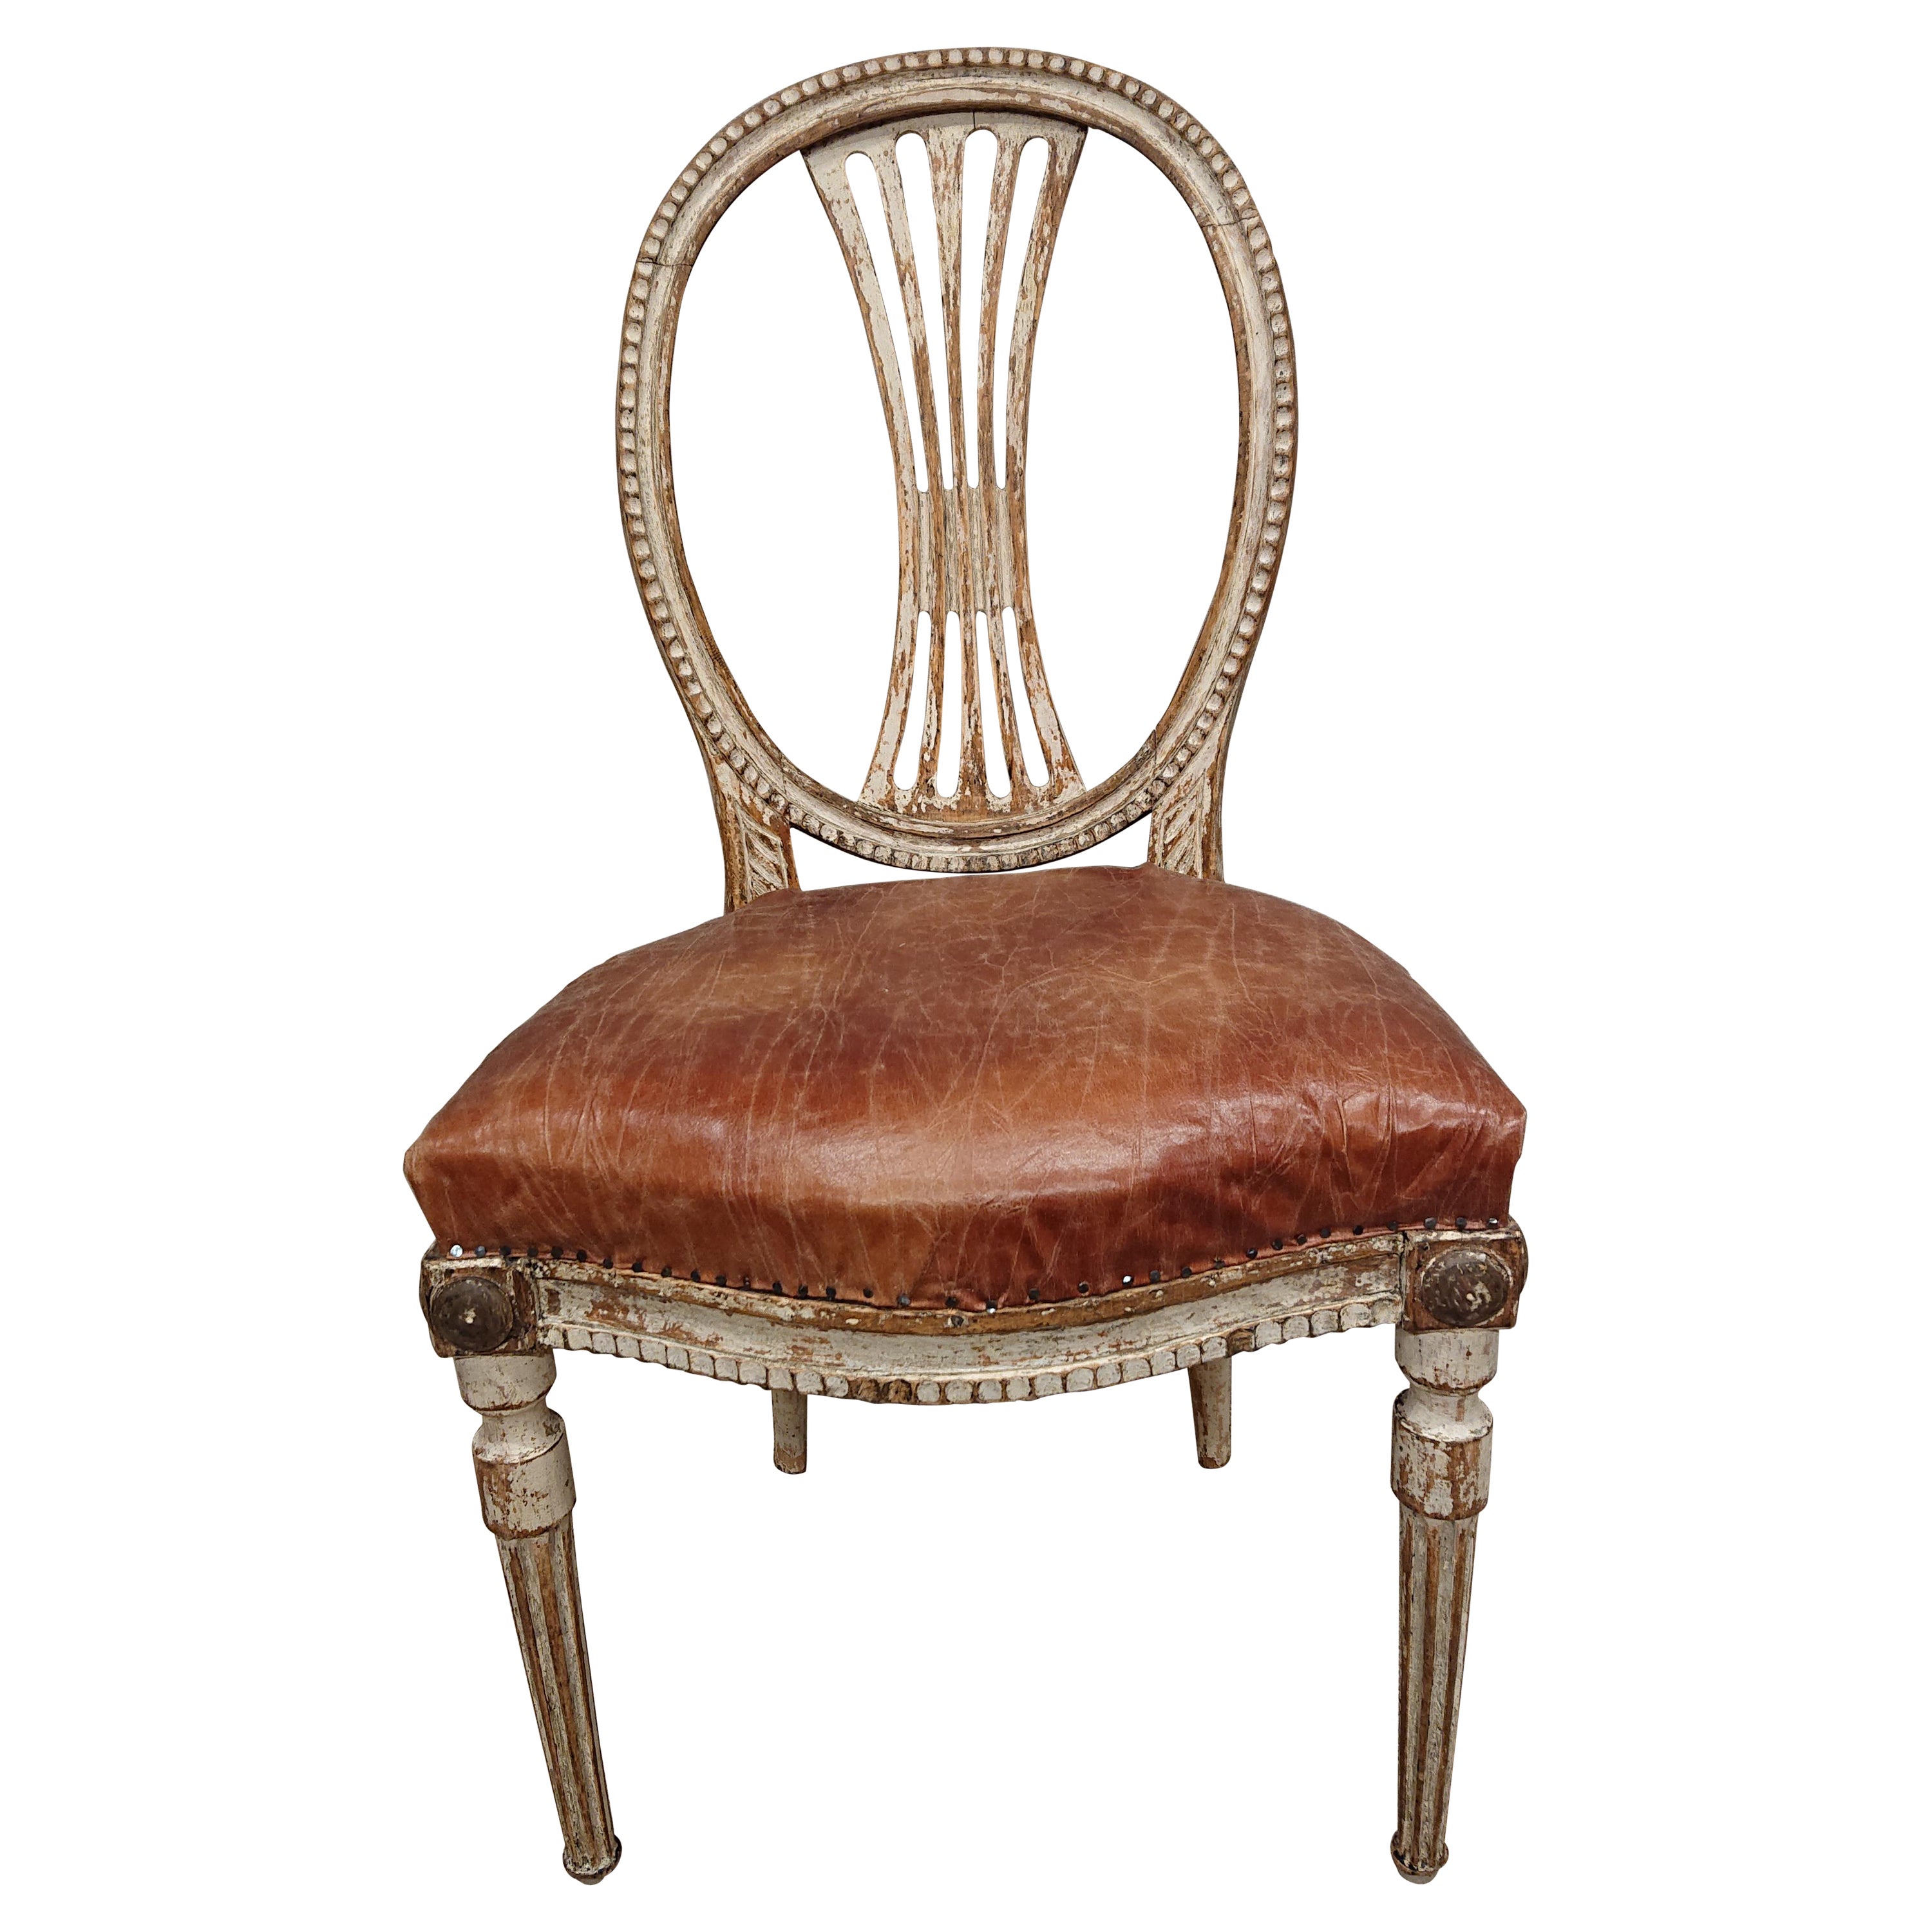 19th Century Swedish Gustavian Chair from Lindome with Original Paint